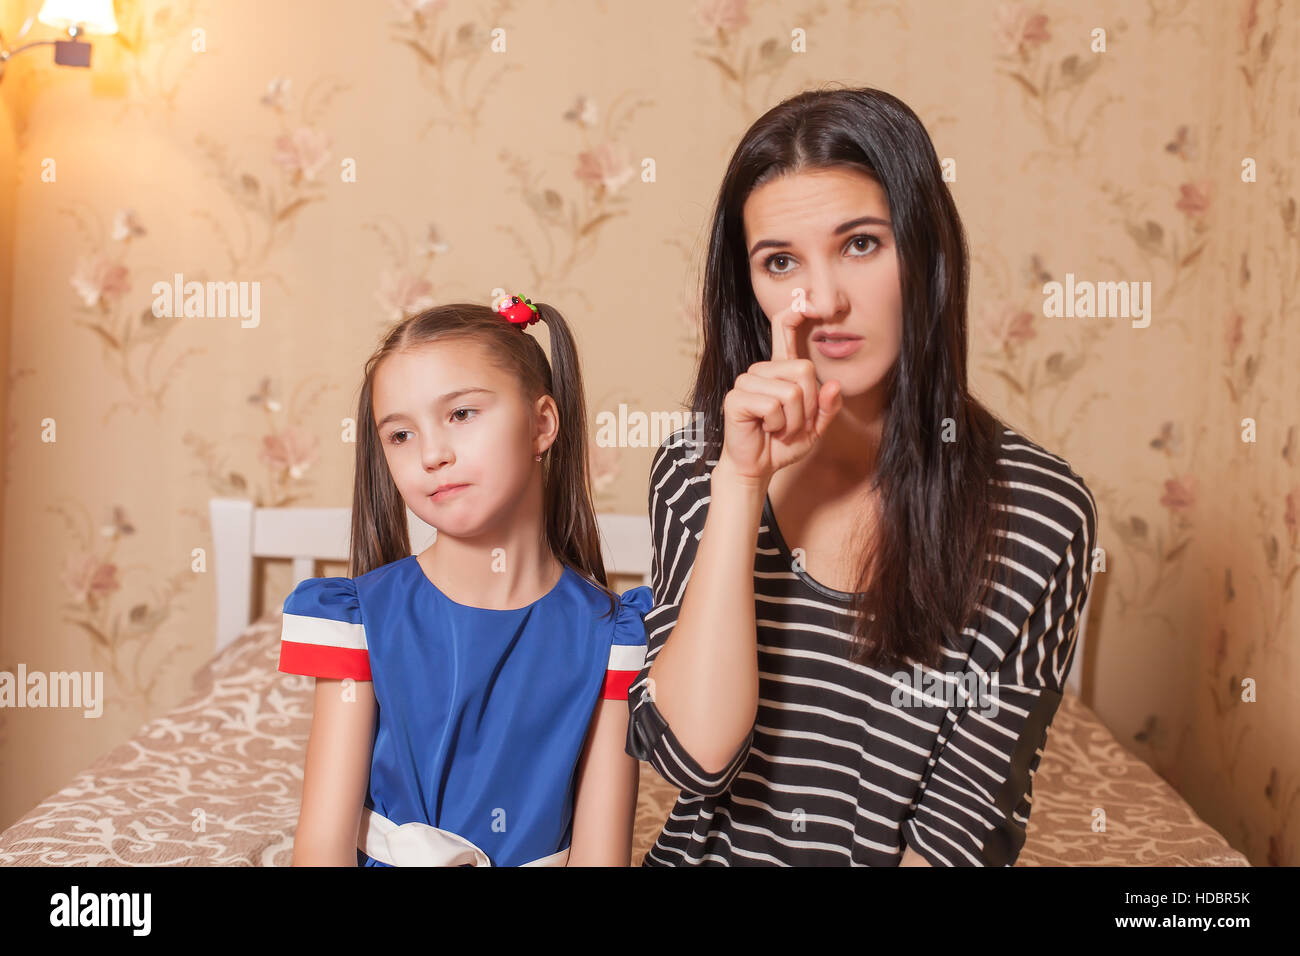 Mother picking a nose against her daughter. Stock Photo